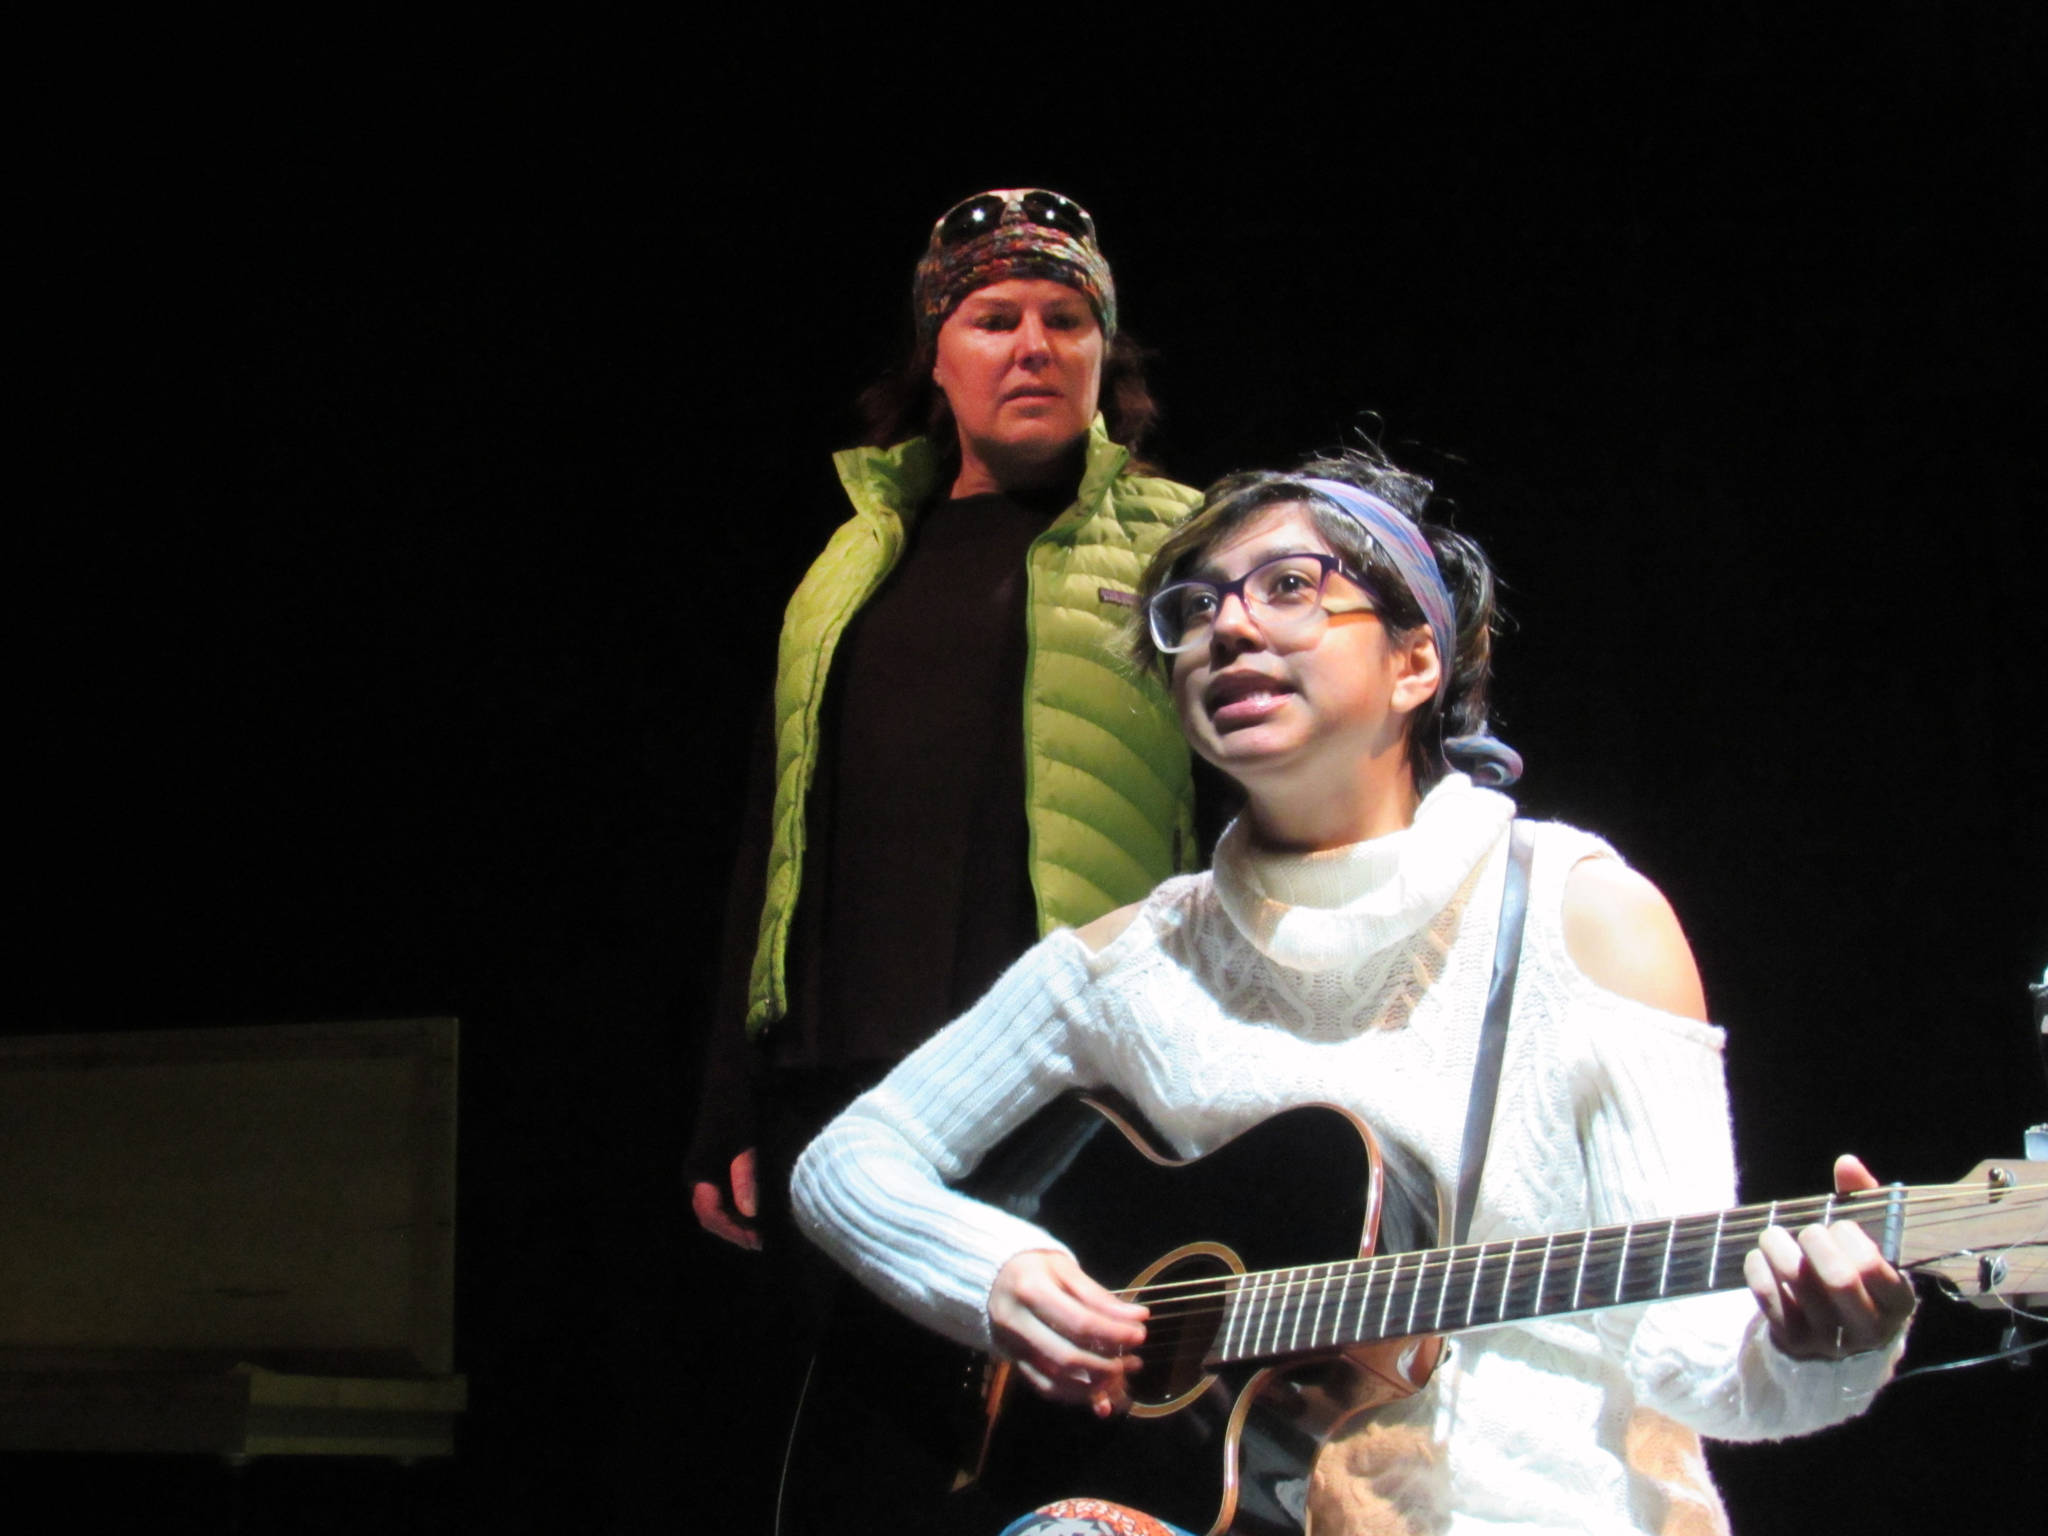 Caroline, portrayed by Victoria Bundonis, isn’t happy when songwriter Kira, portrayed by Michaela Escarcega, secures funding to travel on board a research vessel during rehearsals for “Franklin” at Perseverance Theatre, Sunday, Nov. 25. (Ben Hohenstatt | Capital City Weekly)